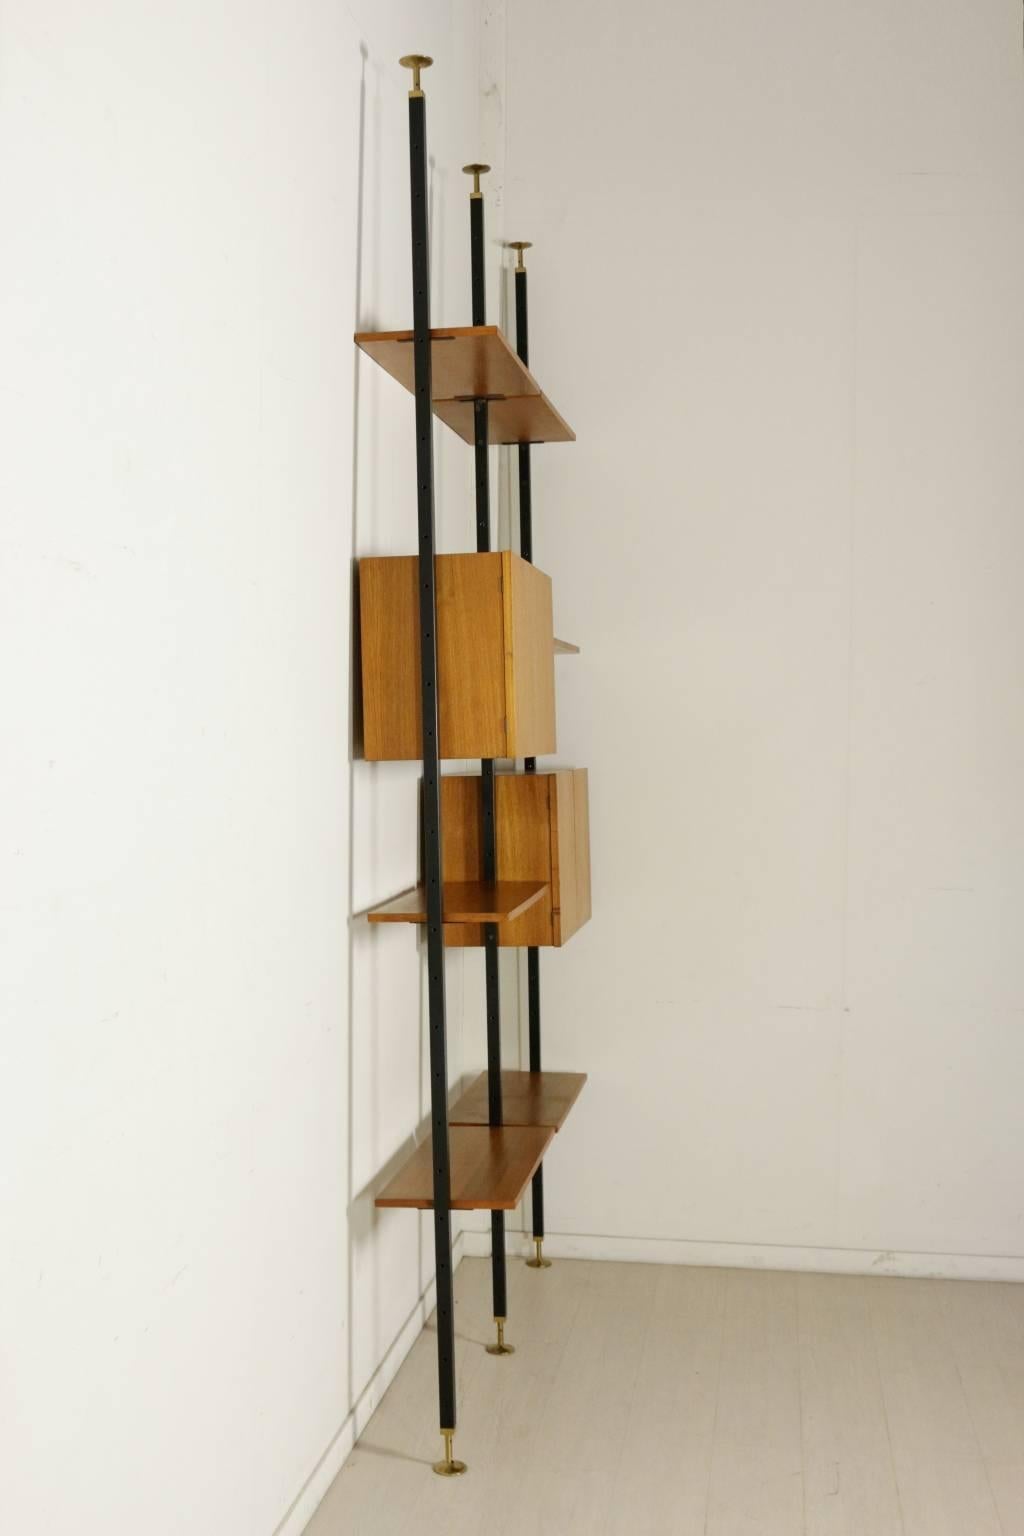 A floor-to-ceiling bookcase with elements adjustable in height, teak veneer, metal uprights with brass tips. Manufactured in Italy, 1950s-1960s.